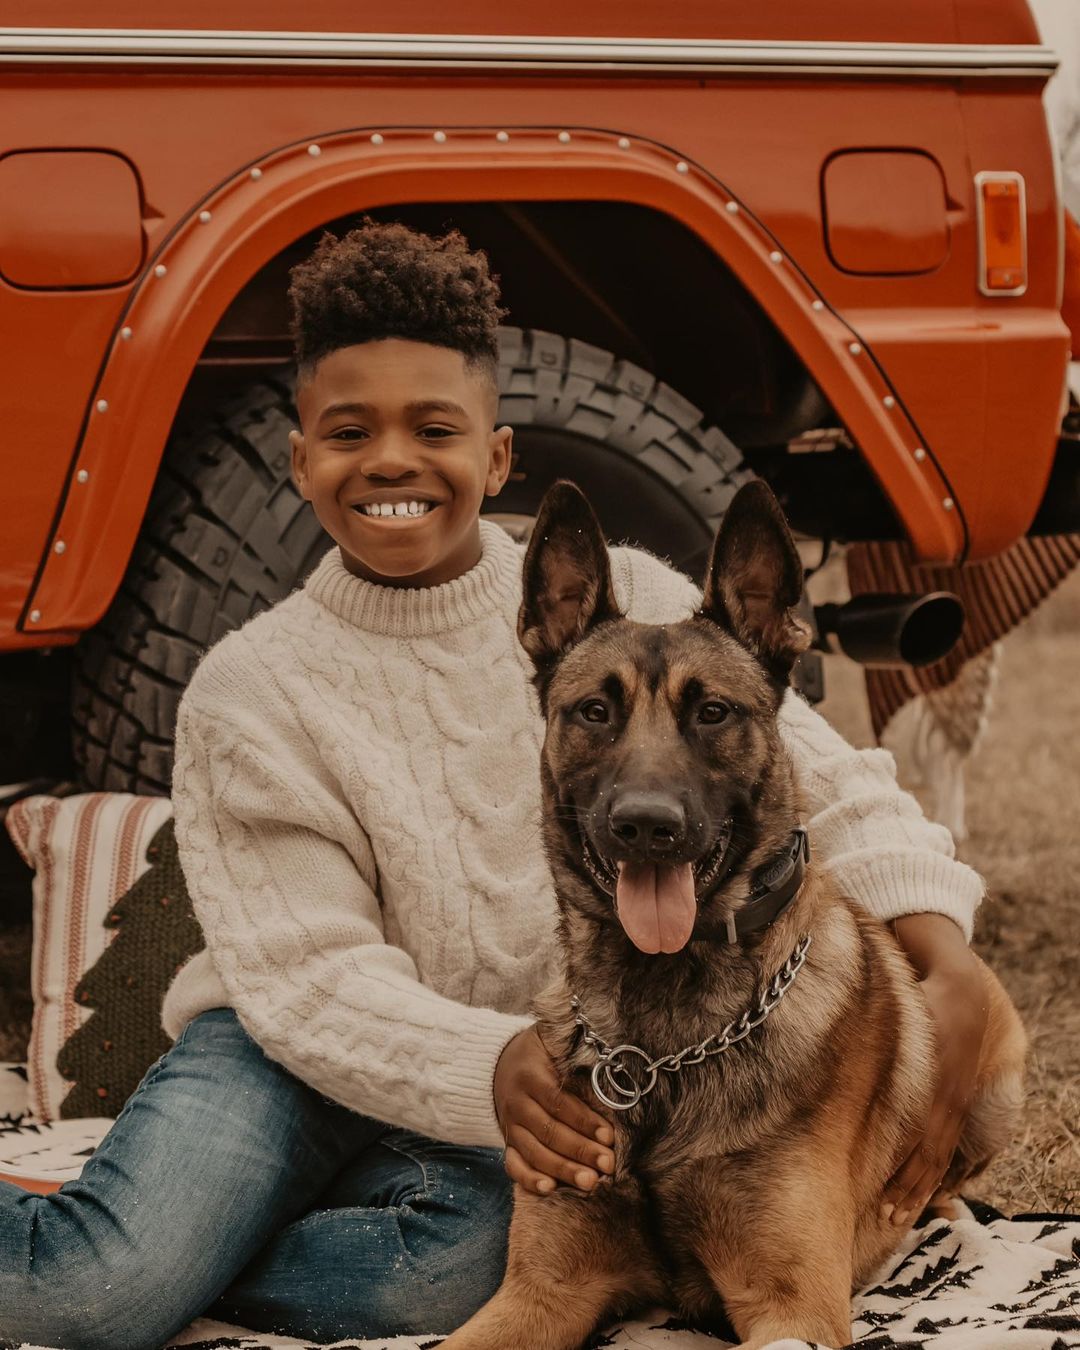 Picture of Brandi Maxiell's son John Maxiell II and her Malinois dog